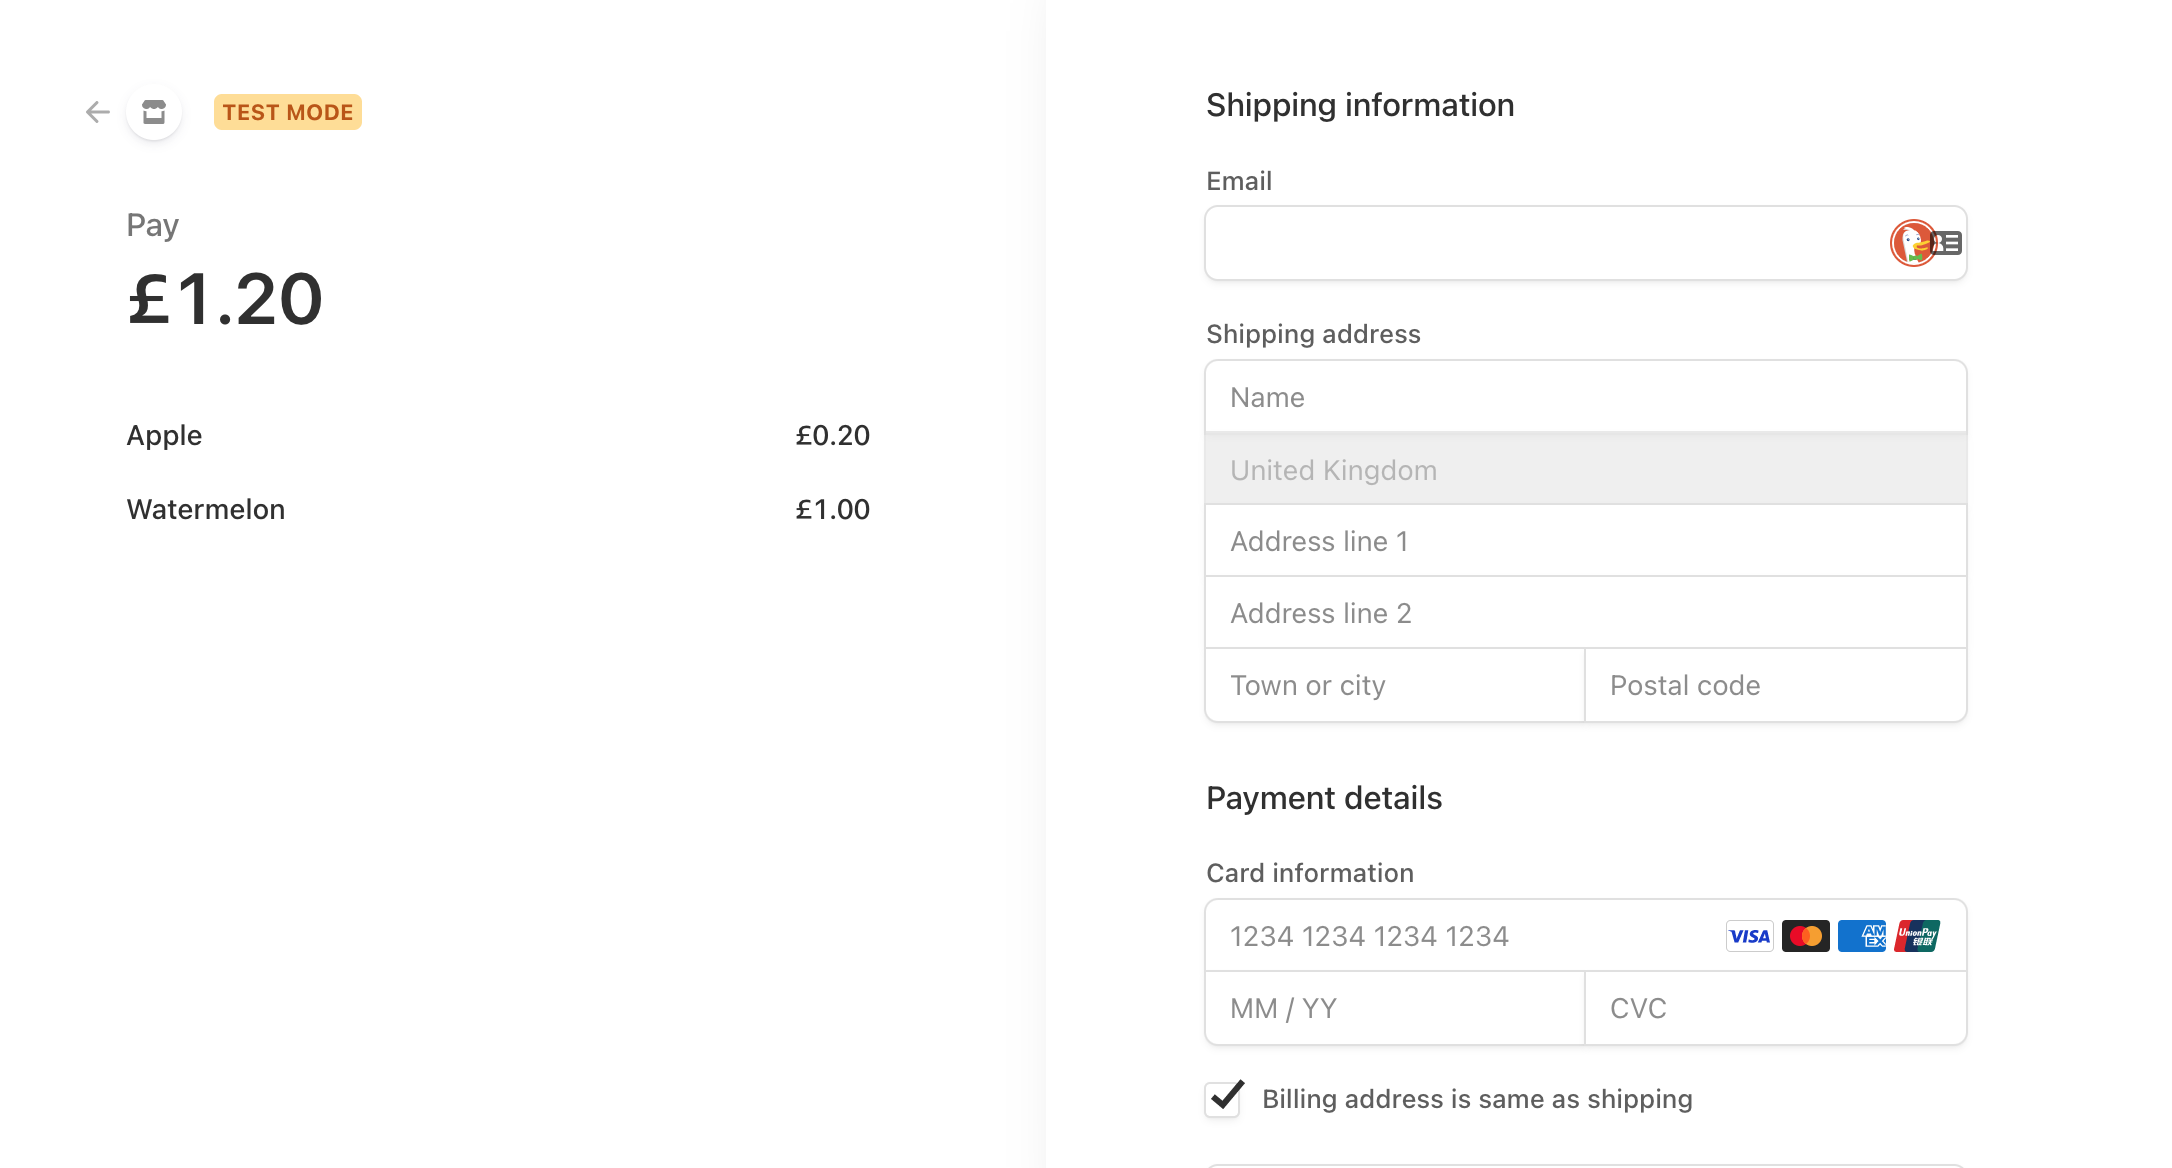 Screenshot of the Stripe Checkout page. The total price of products is 1.20 and there are form fields to enter your email, shipping address and payment details.